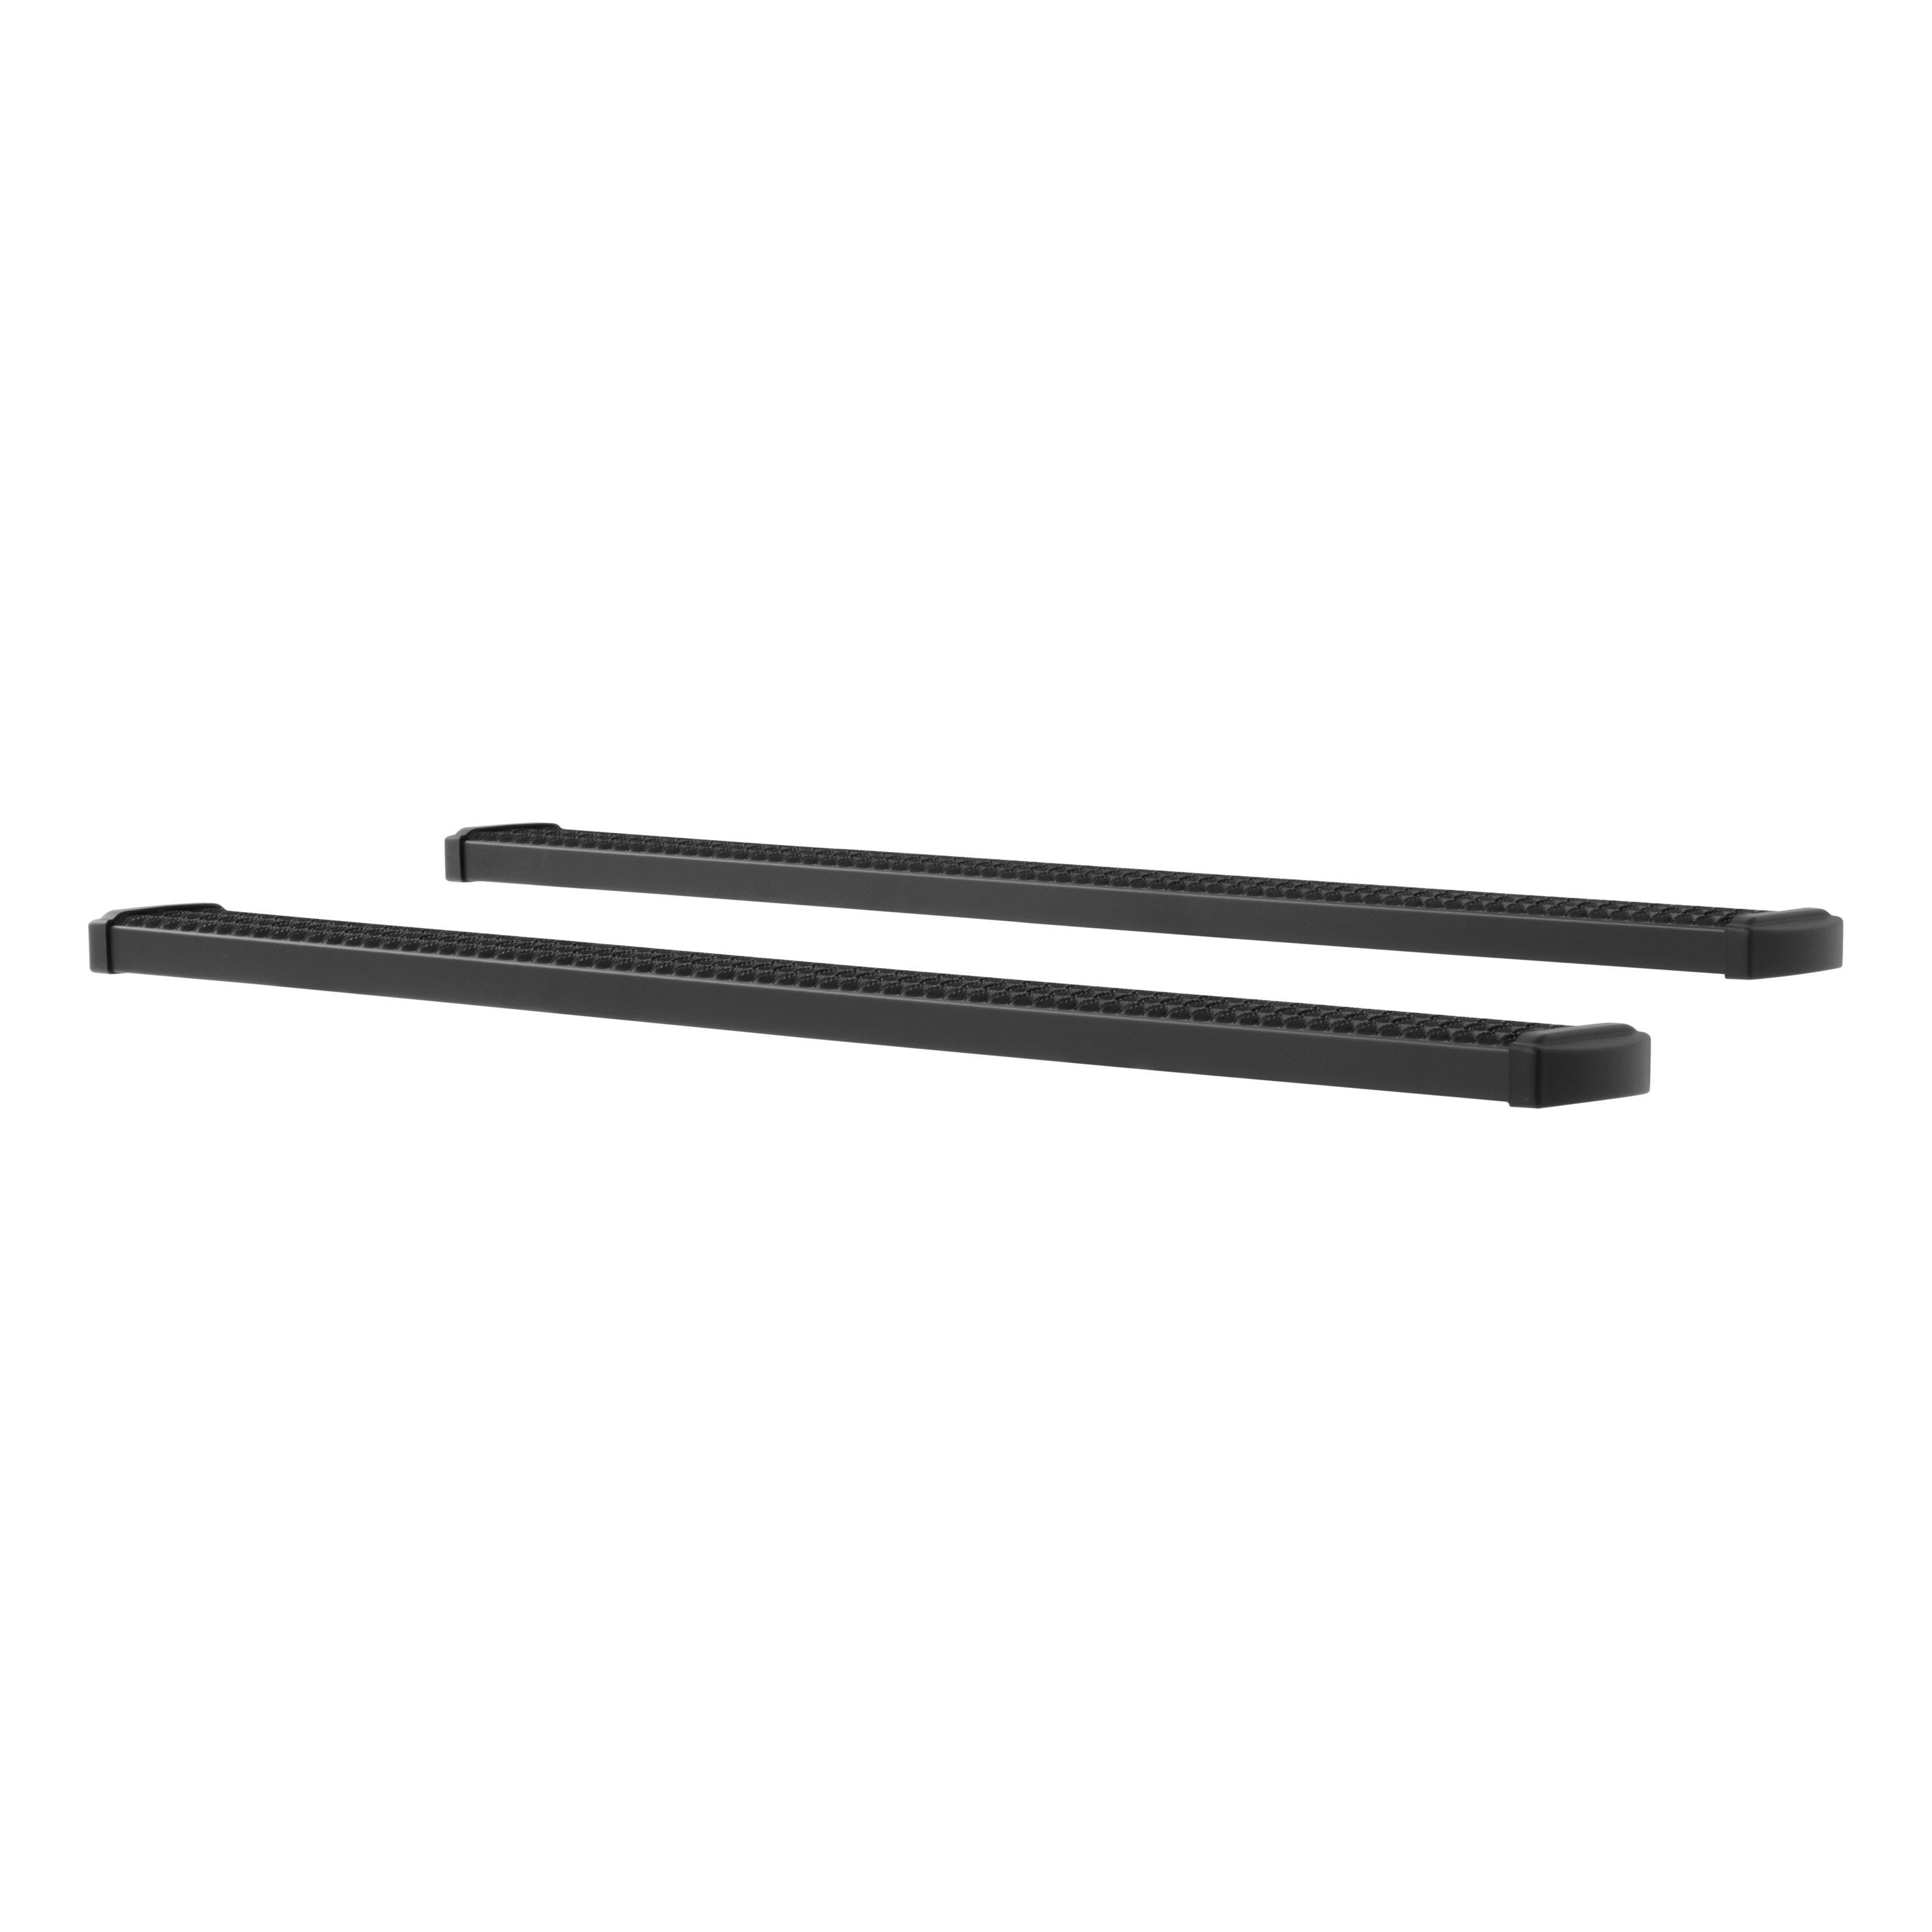 LUVERNE 415078-401117 Grip Step 7 inch Running Boards